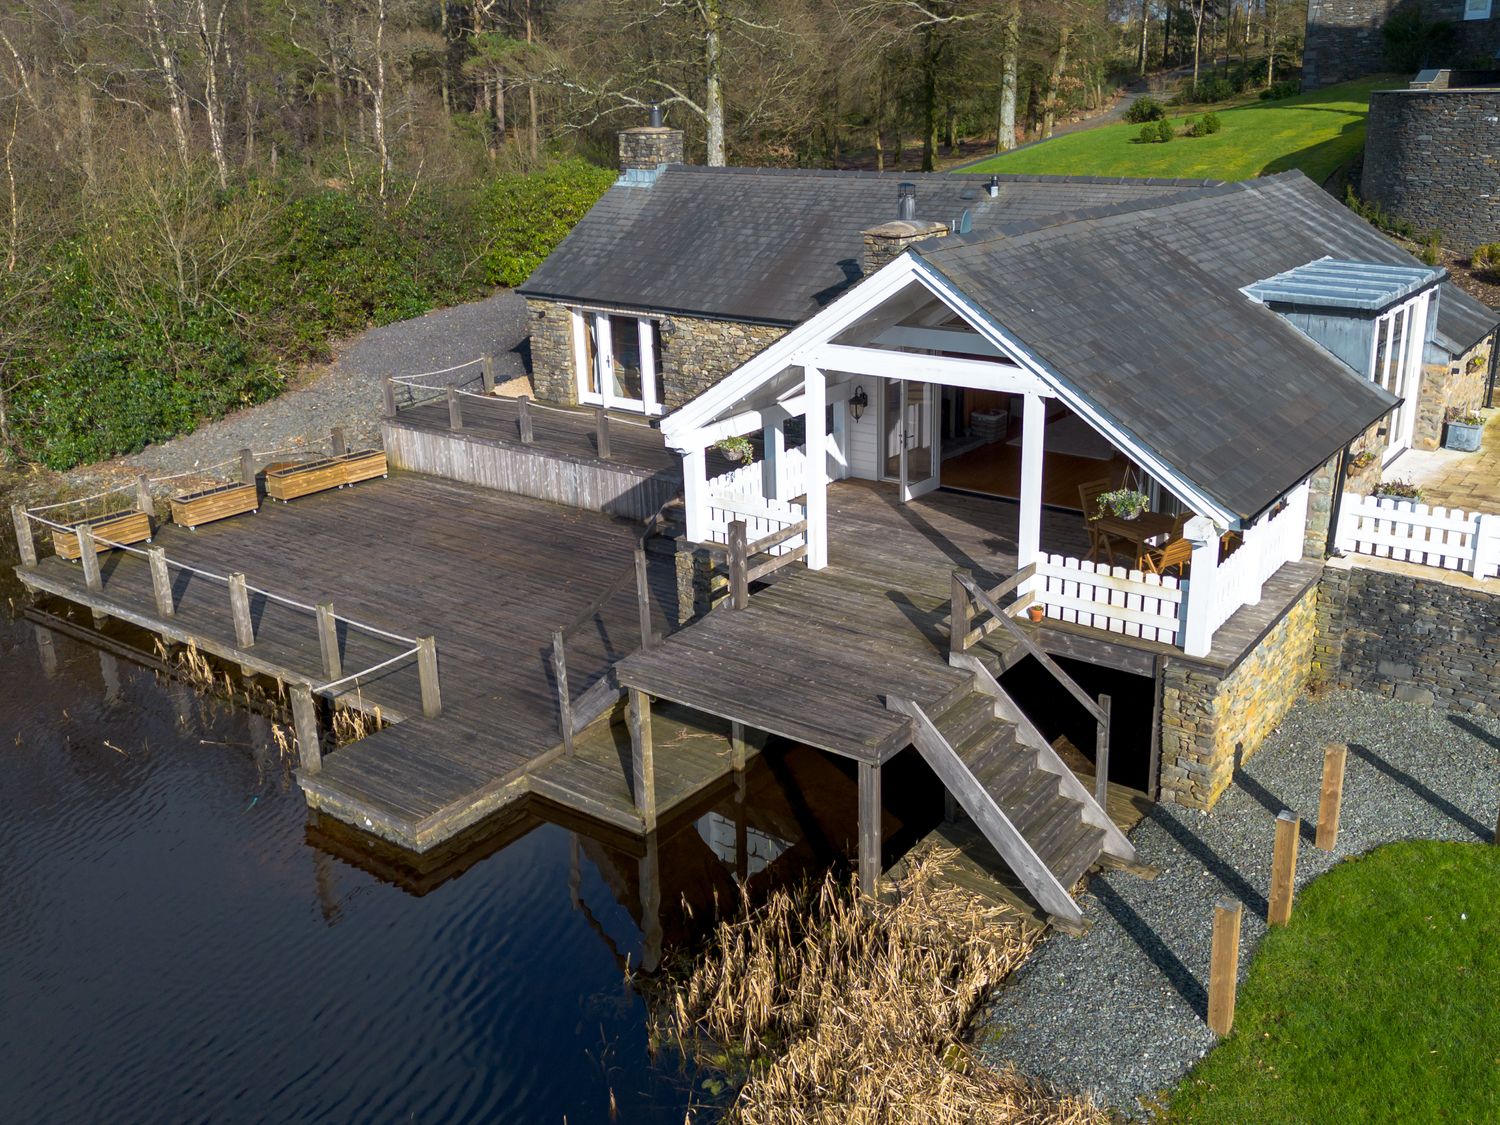 Lilymere Boat House - Lake District - 1149646 - photo 1